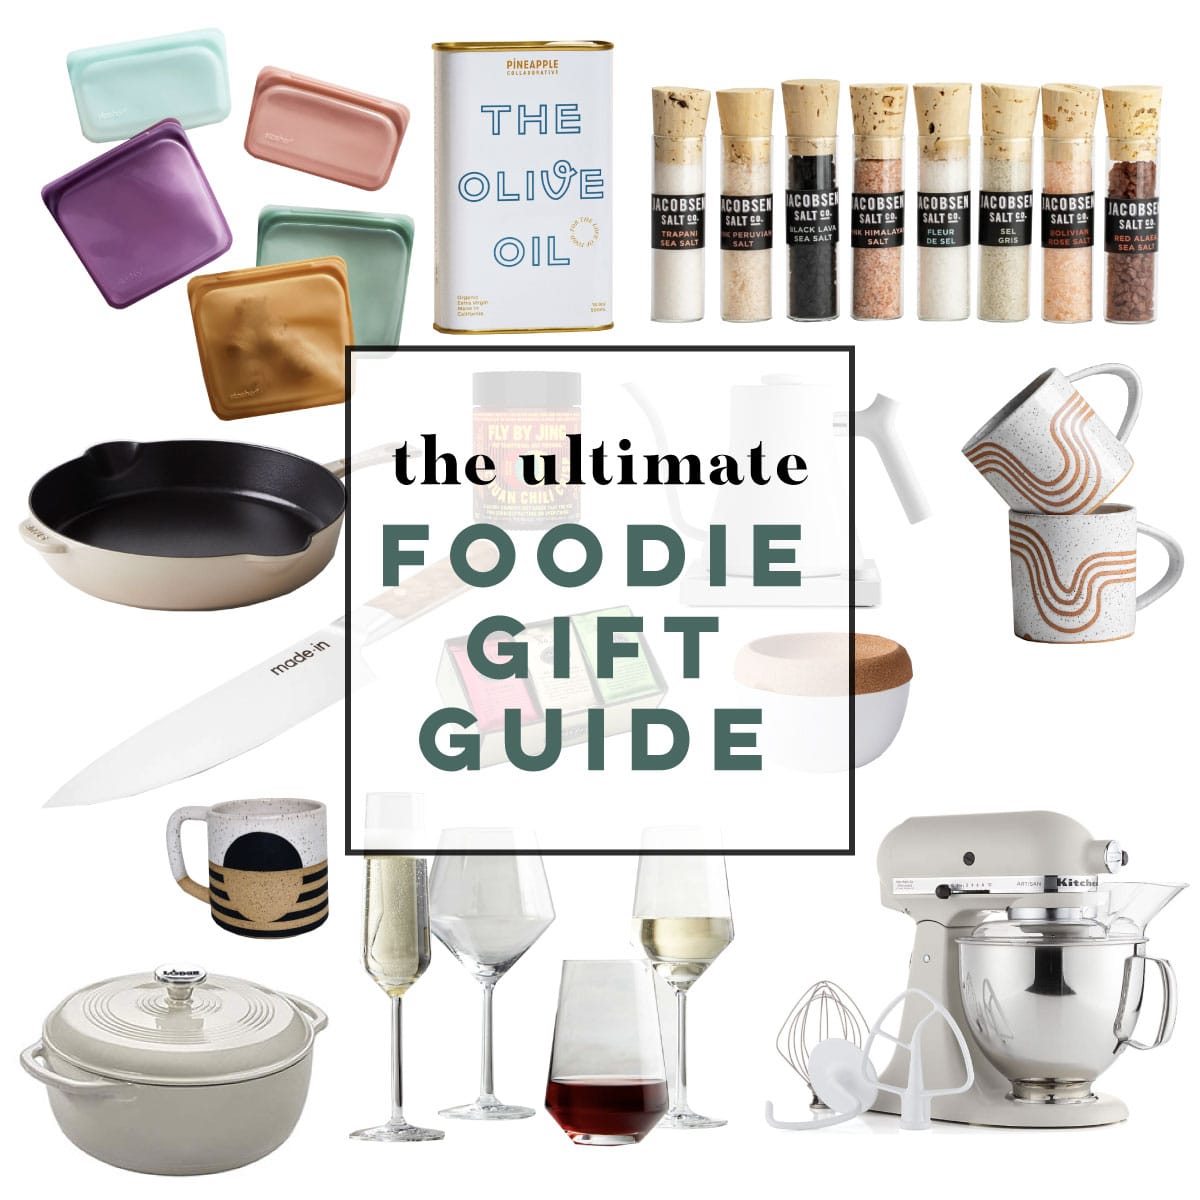 The Ultimate Gift Guide for Foodies & Food Lovers